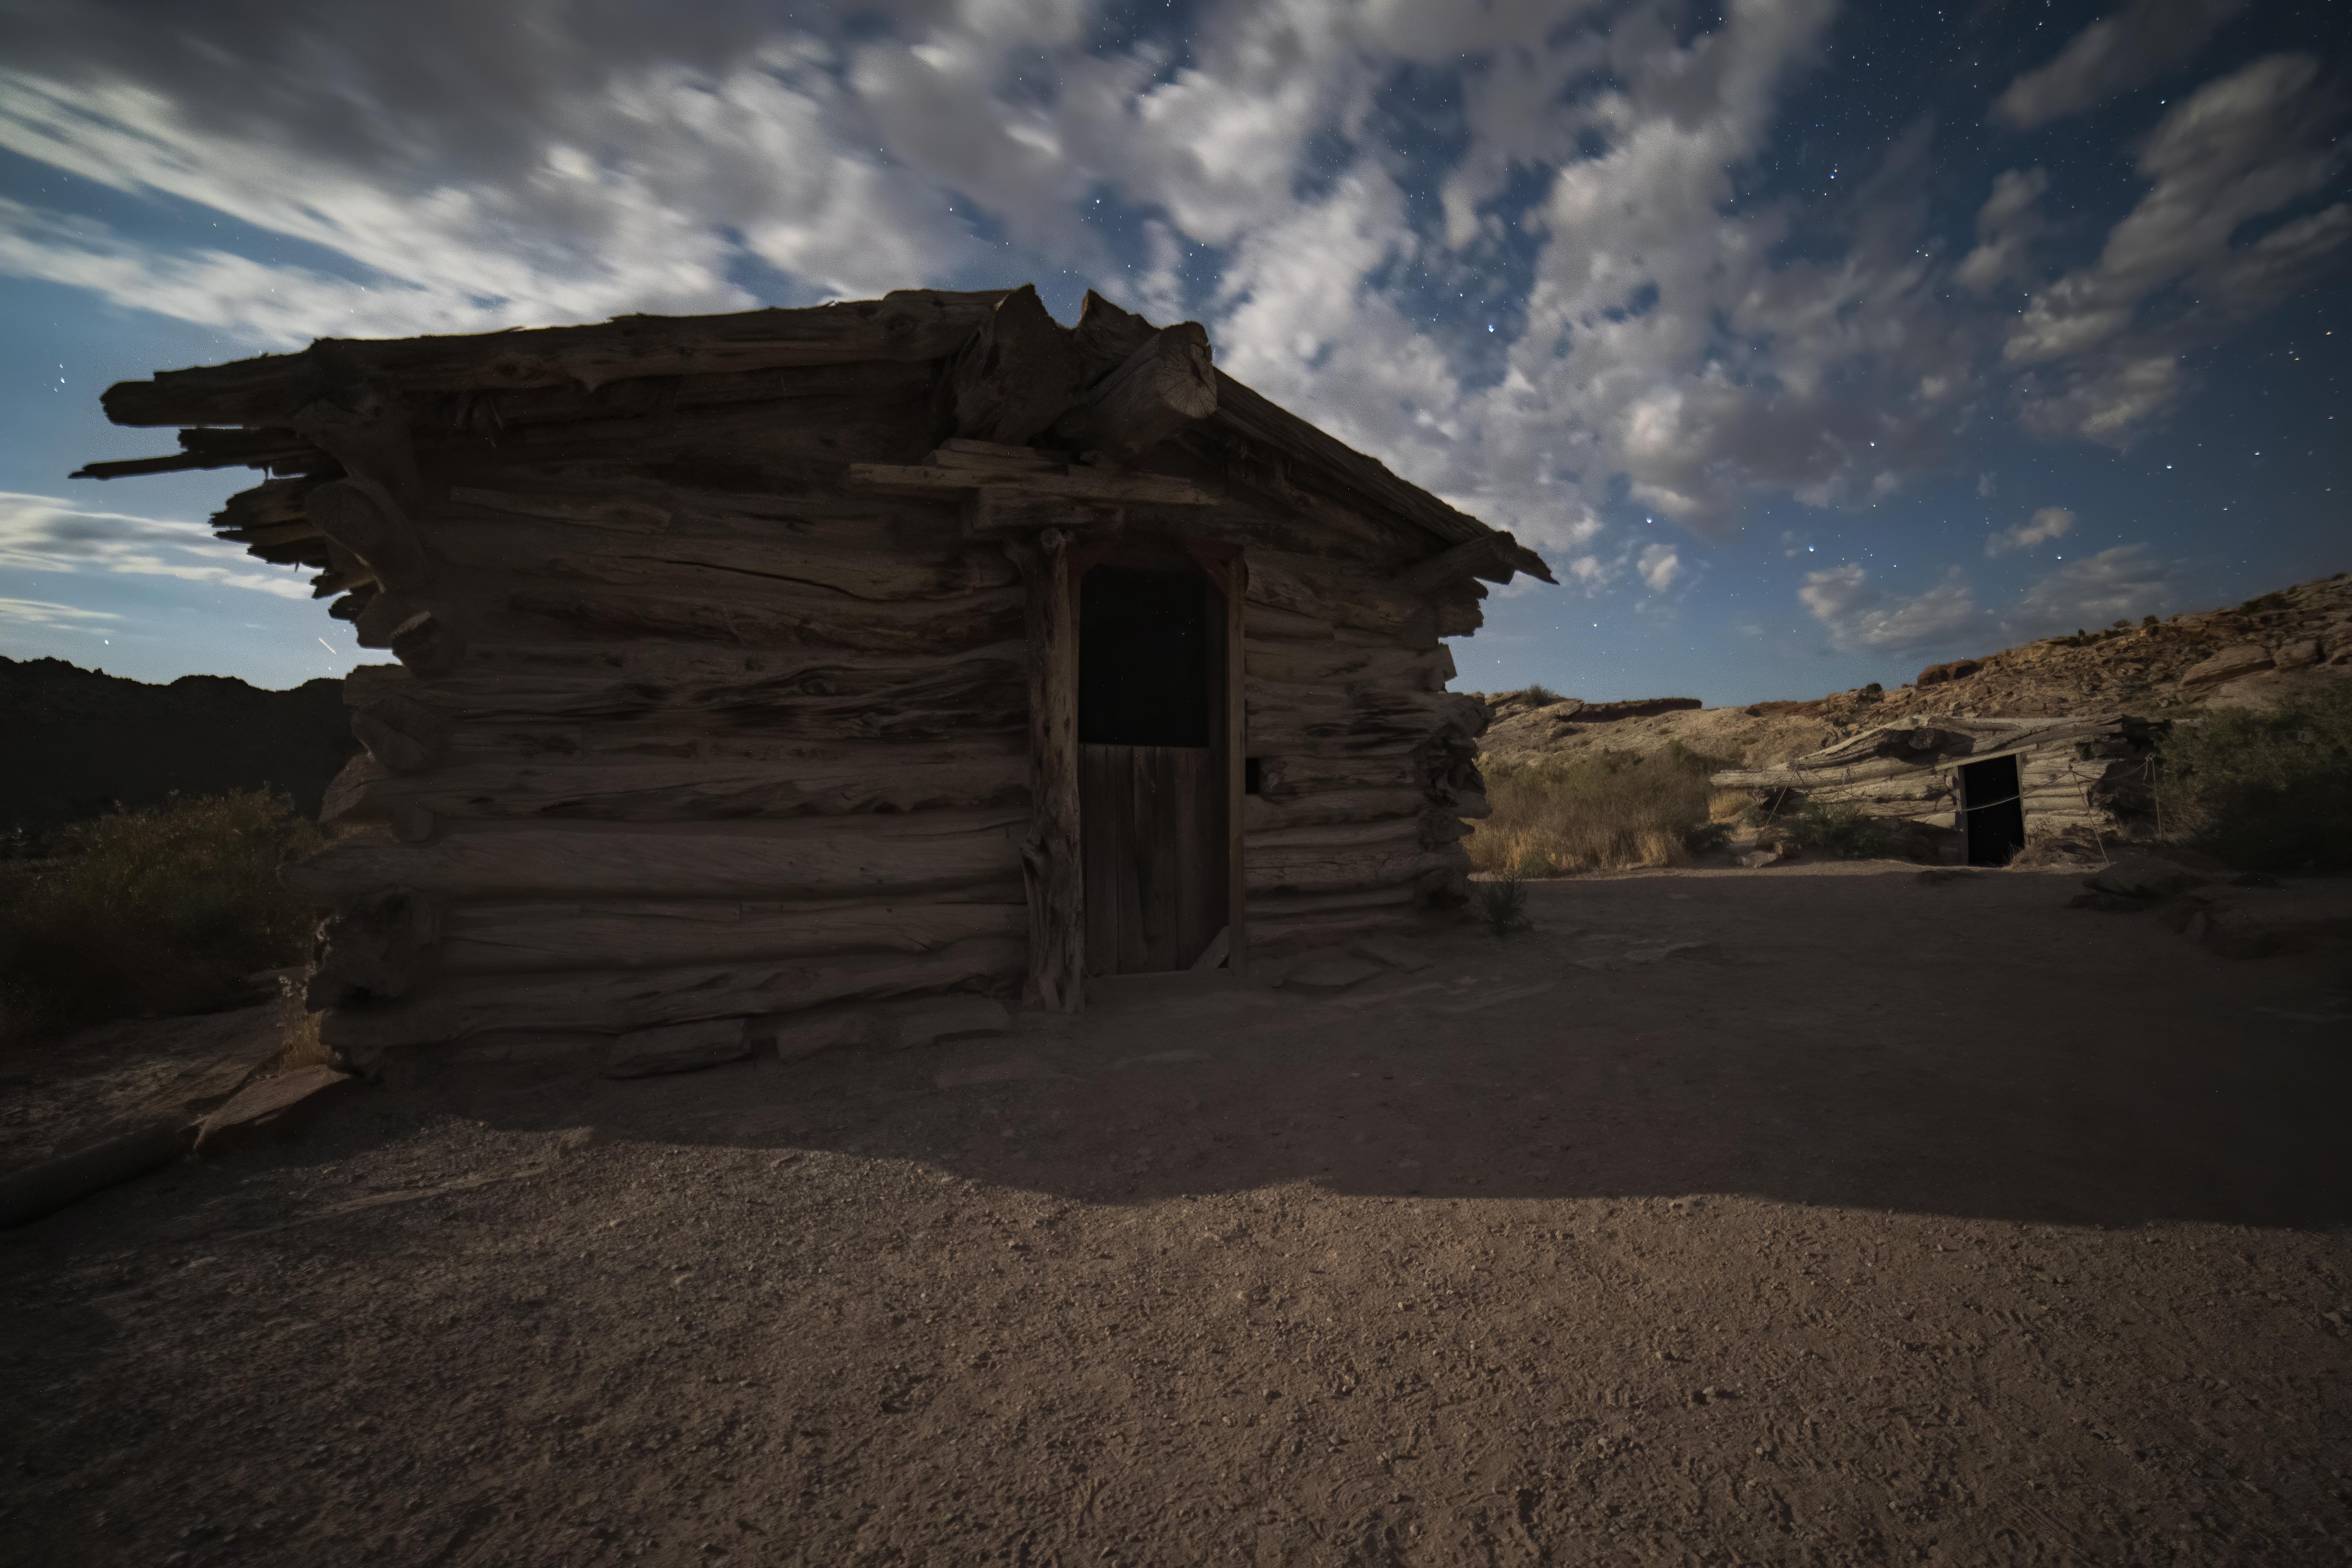 While we've seen what time has done to the Earth's landscape over millions of years, in so little time humans have had a big impact. It started off slowly: European settlers lived in homes such as this just as little as 100 years ago.